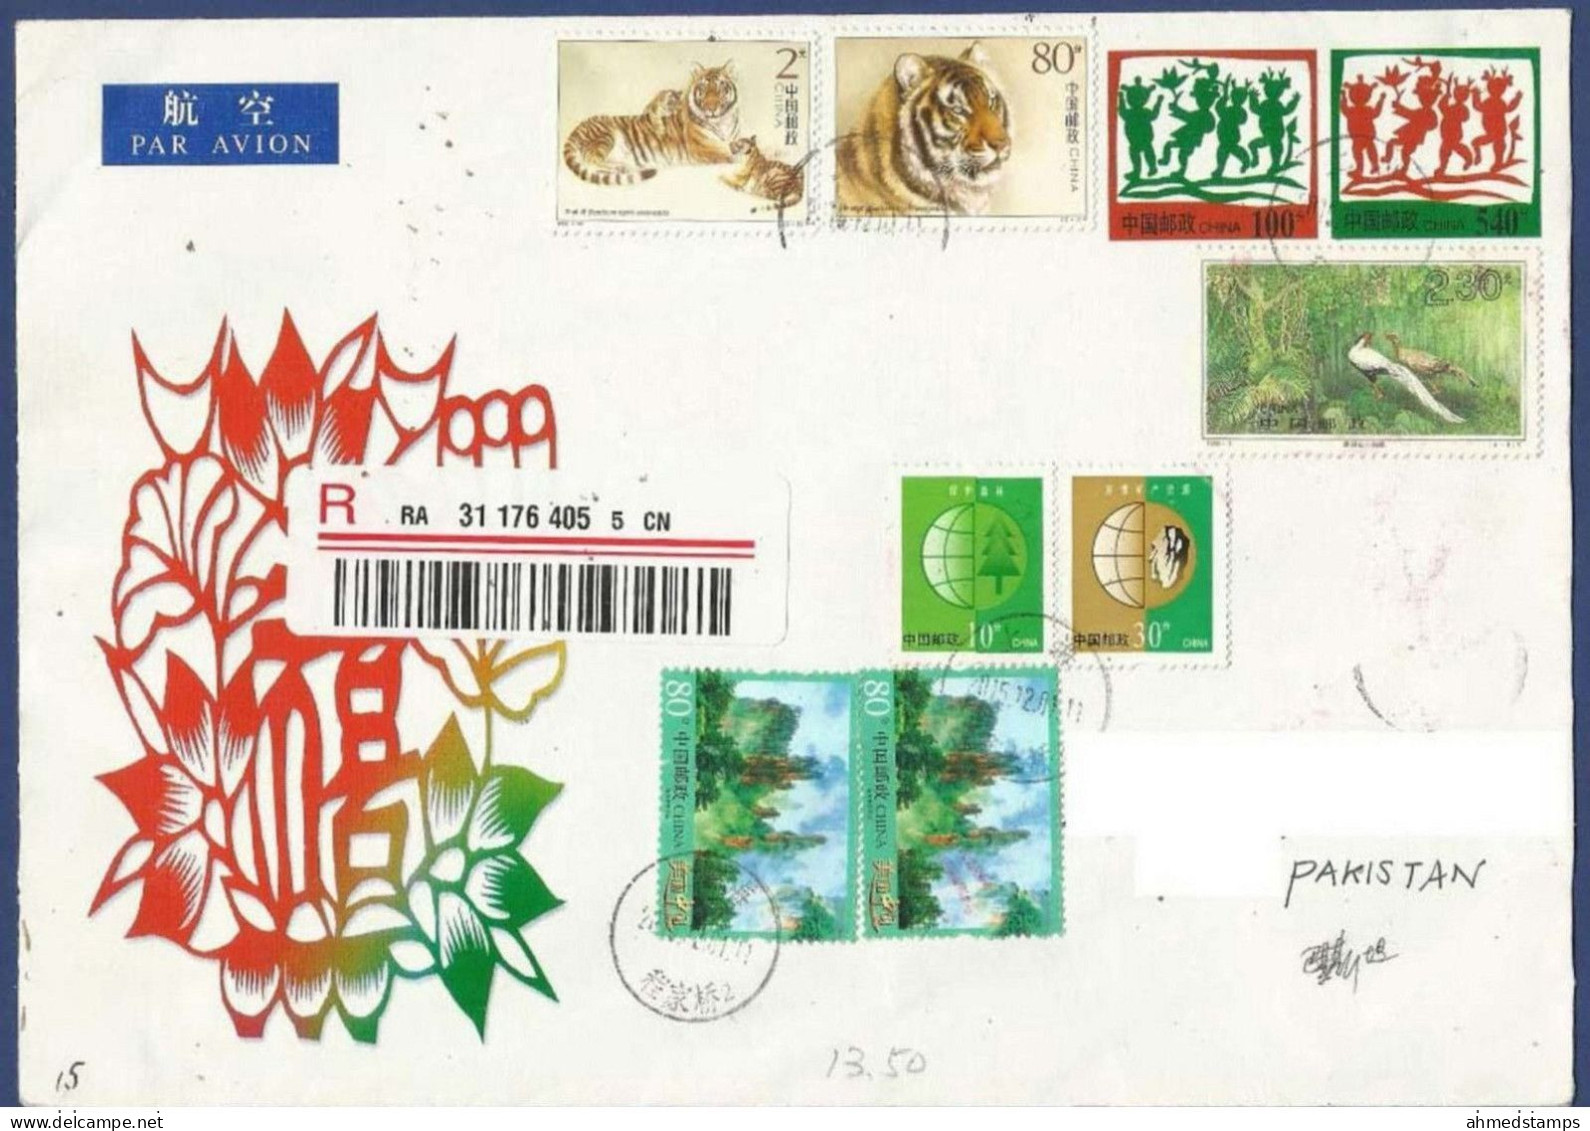 CHINA  REGISTERED POSTAL USED AIRMAIL COVER TO PAKISTAN - Airmail